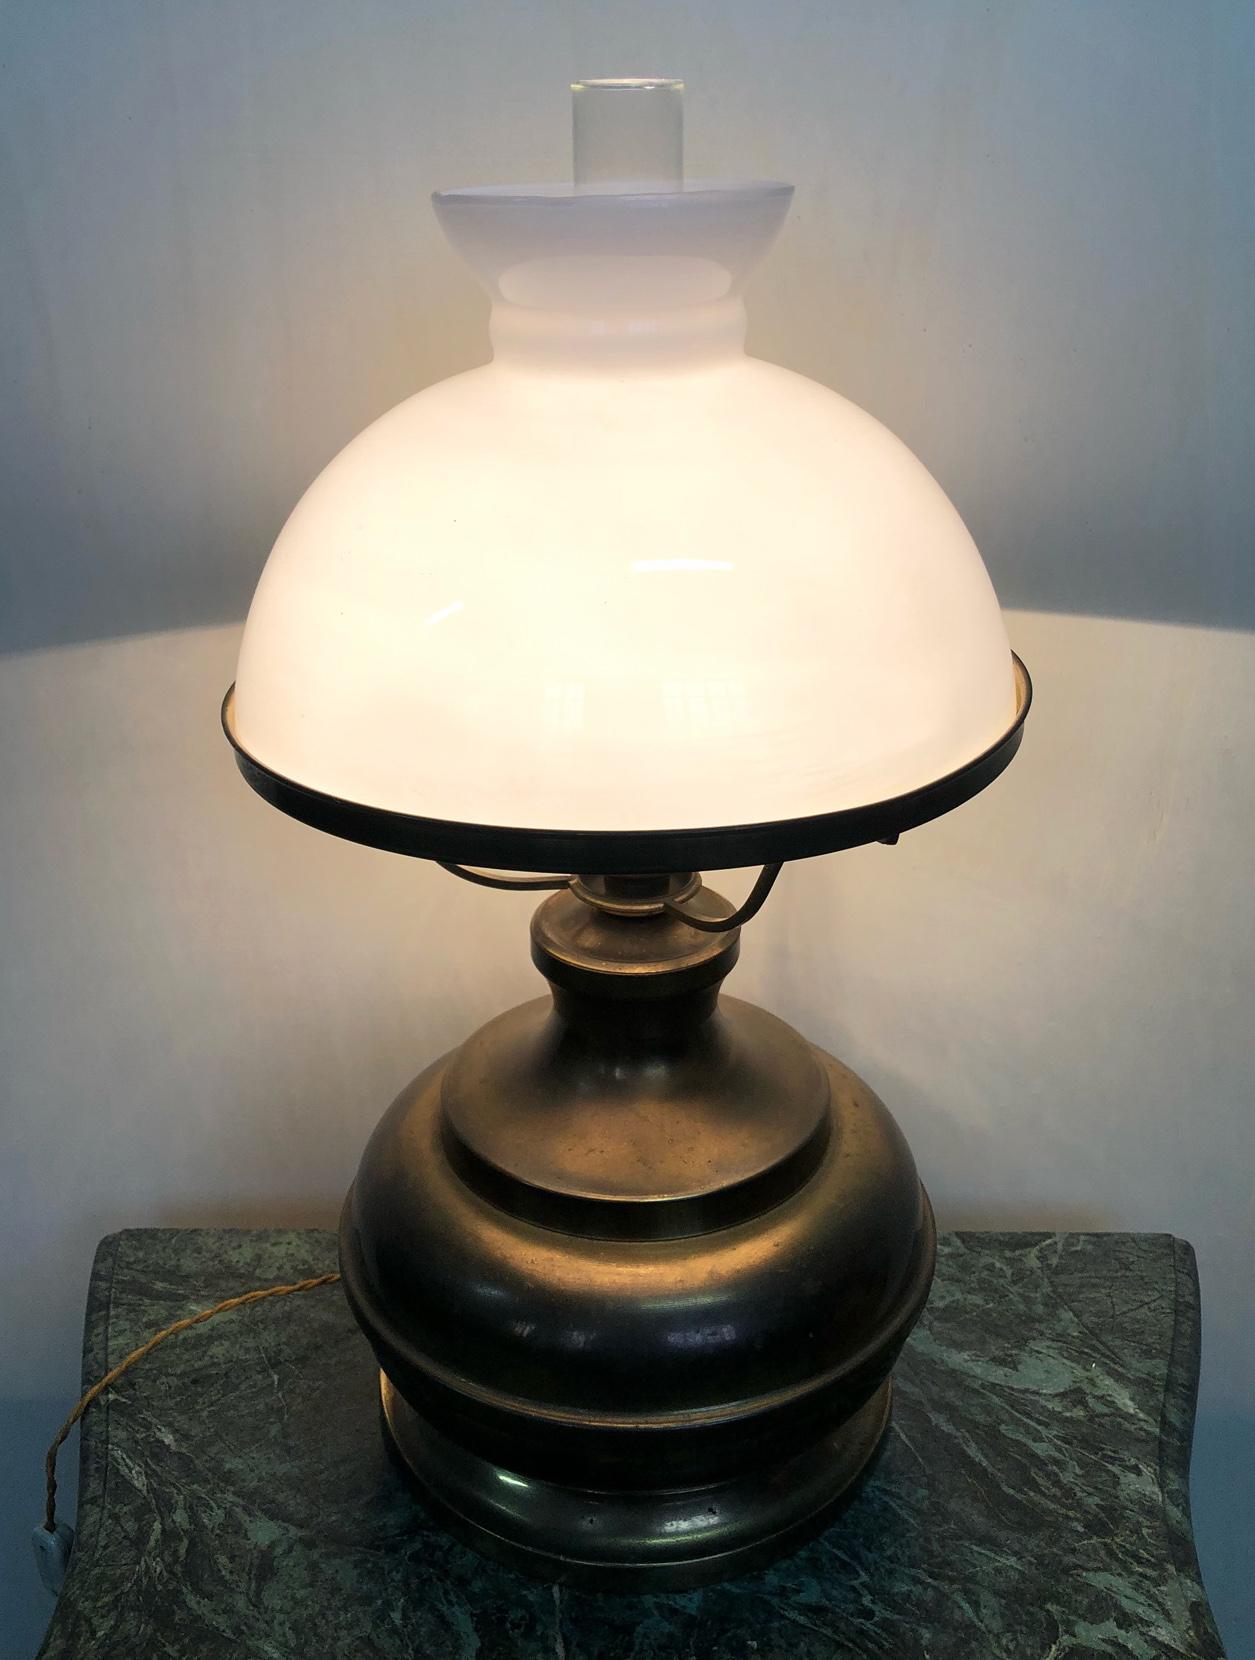 Table lamp in brass and white glass, original Italian from 1960.
The type of attack of the bulbs is type E27.
If the voltage in your country is not 220V I suggest you ask your electrician and installer if you can use an adapter or a transformer to